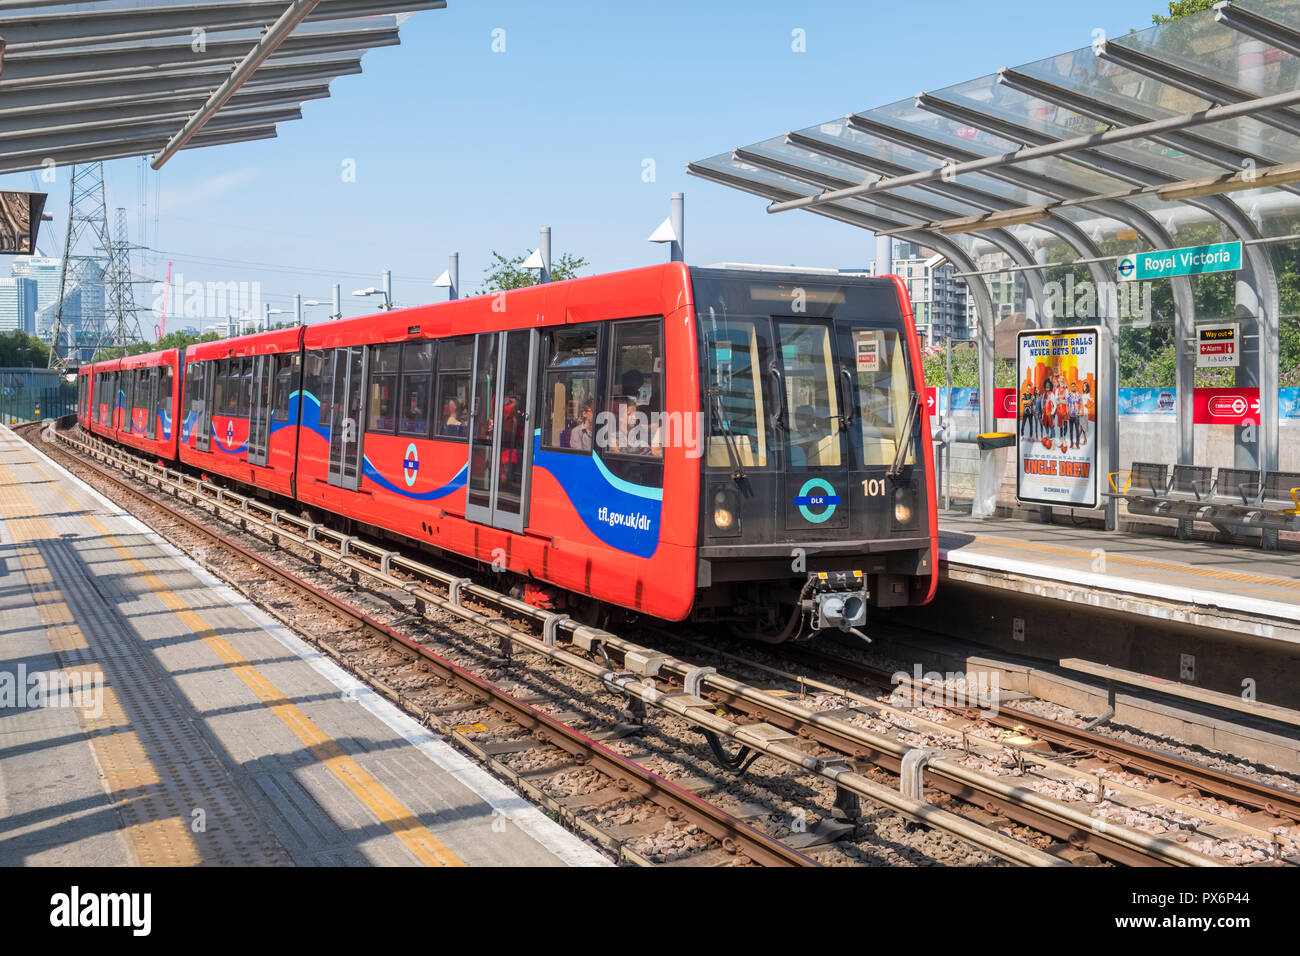 Docklands Light Railway (DLR) train in Royal Victoria Station, London, England, UK Stock Photo